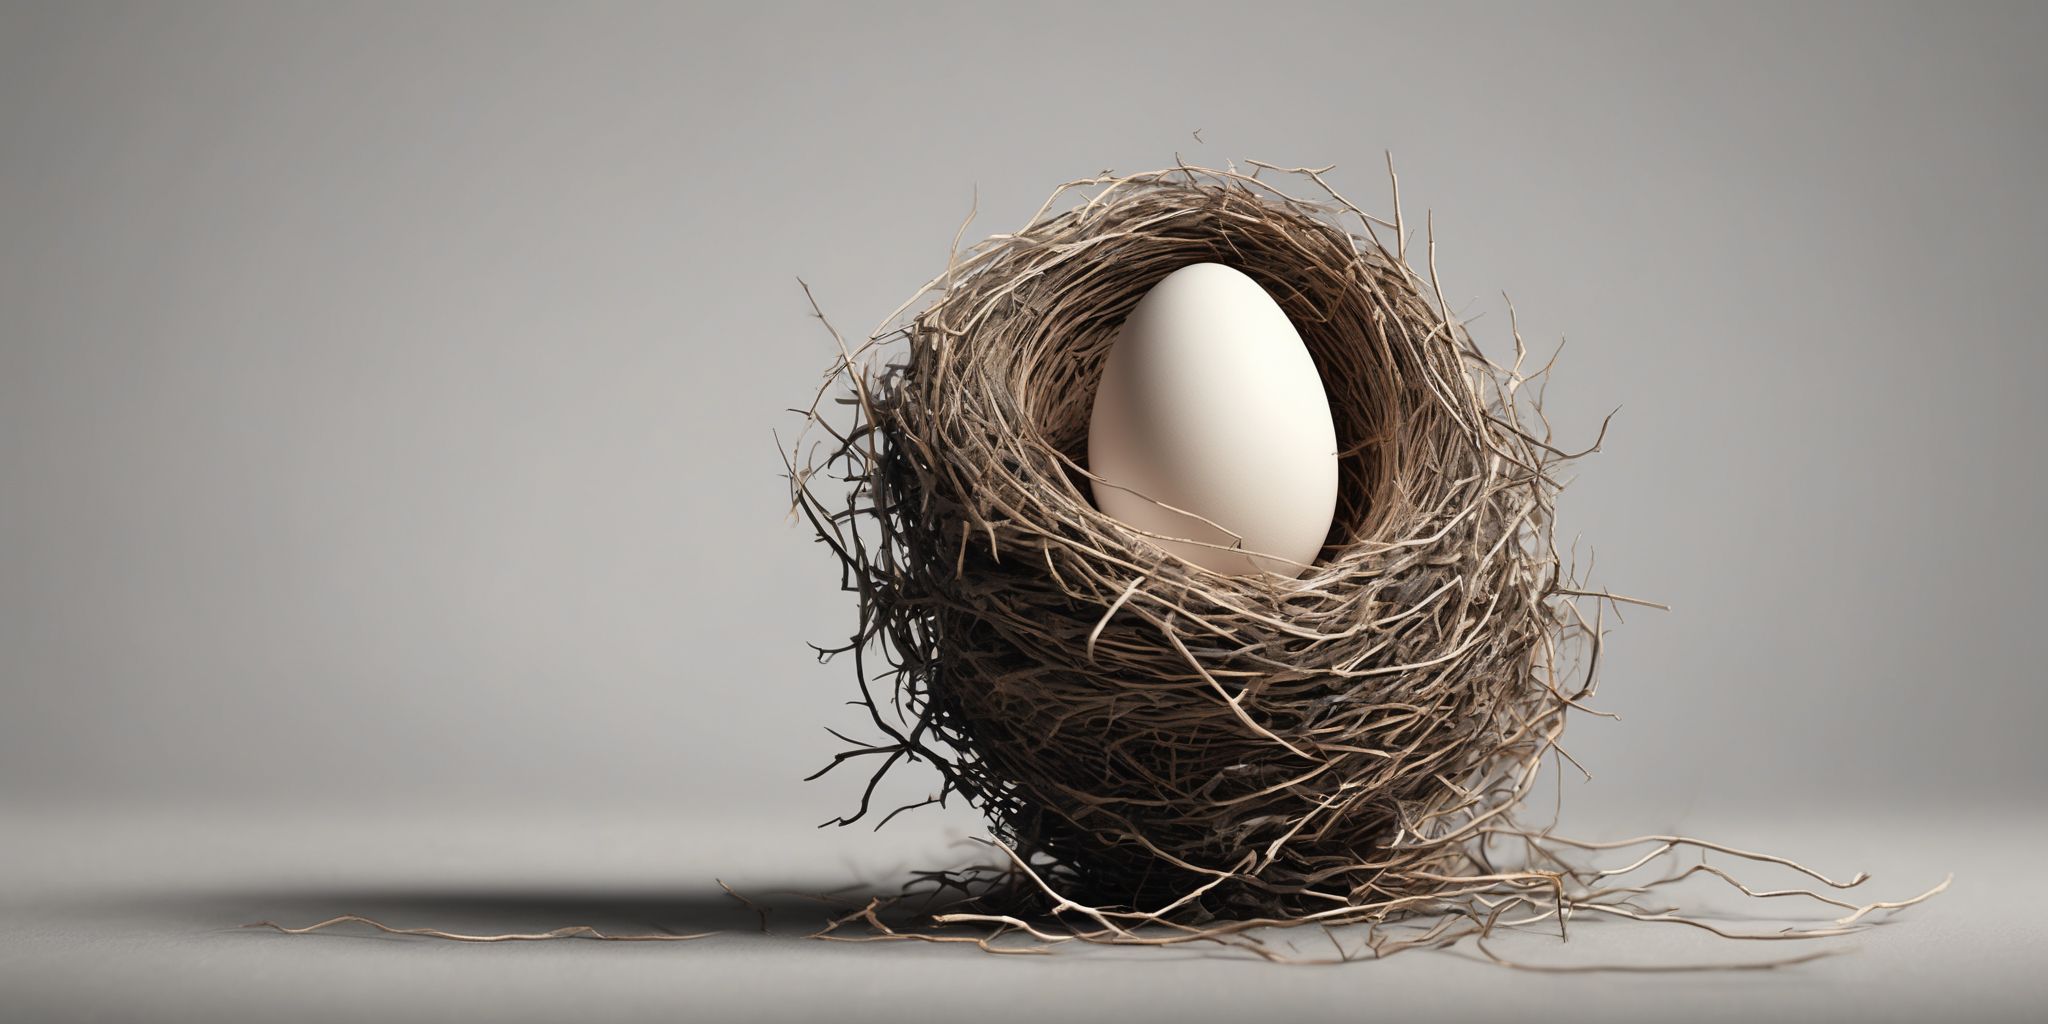 Nest egg  in realistic, photographic style